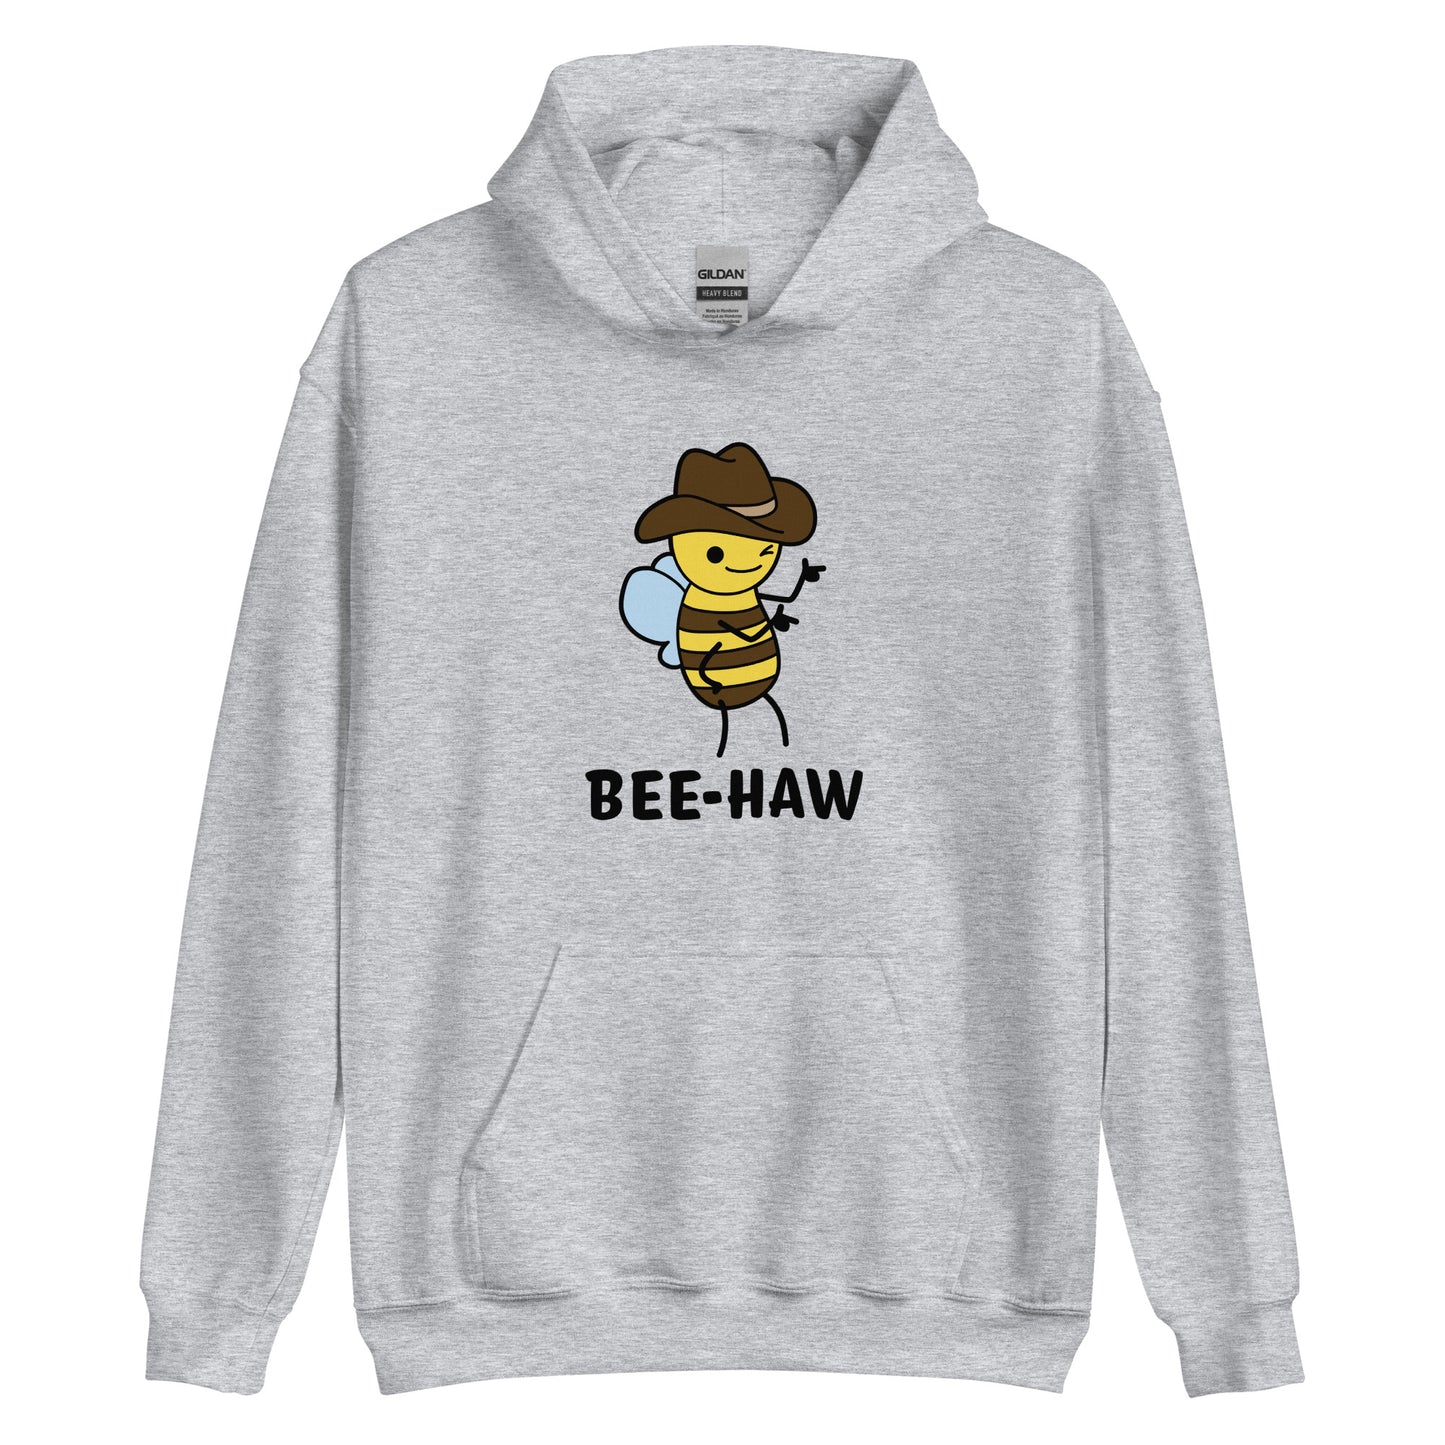 A gray hooded sweatshirt featuring a picture of a bee wearing a cowboy hat. The bee is winking and pointing finger guns. Text underneath the bee reads "Bee-Haw"